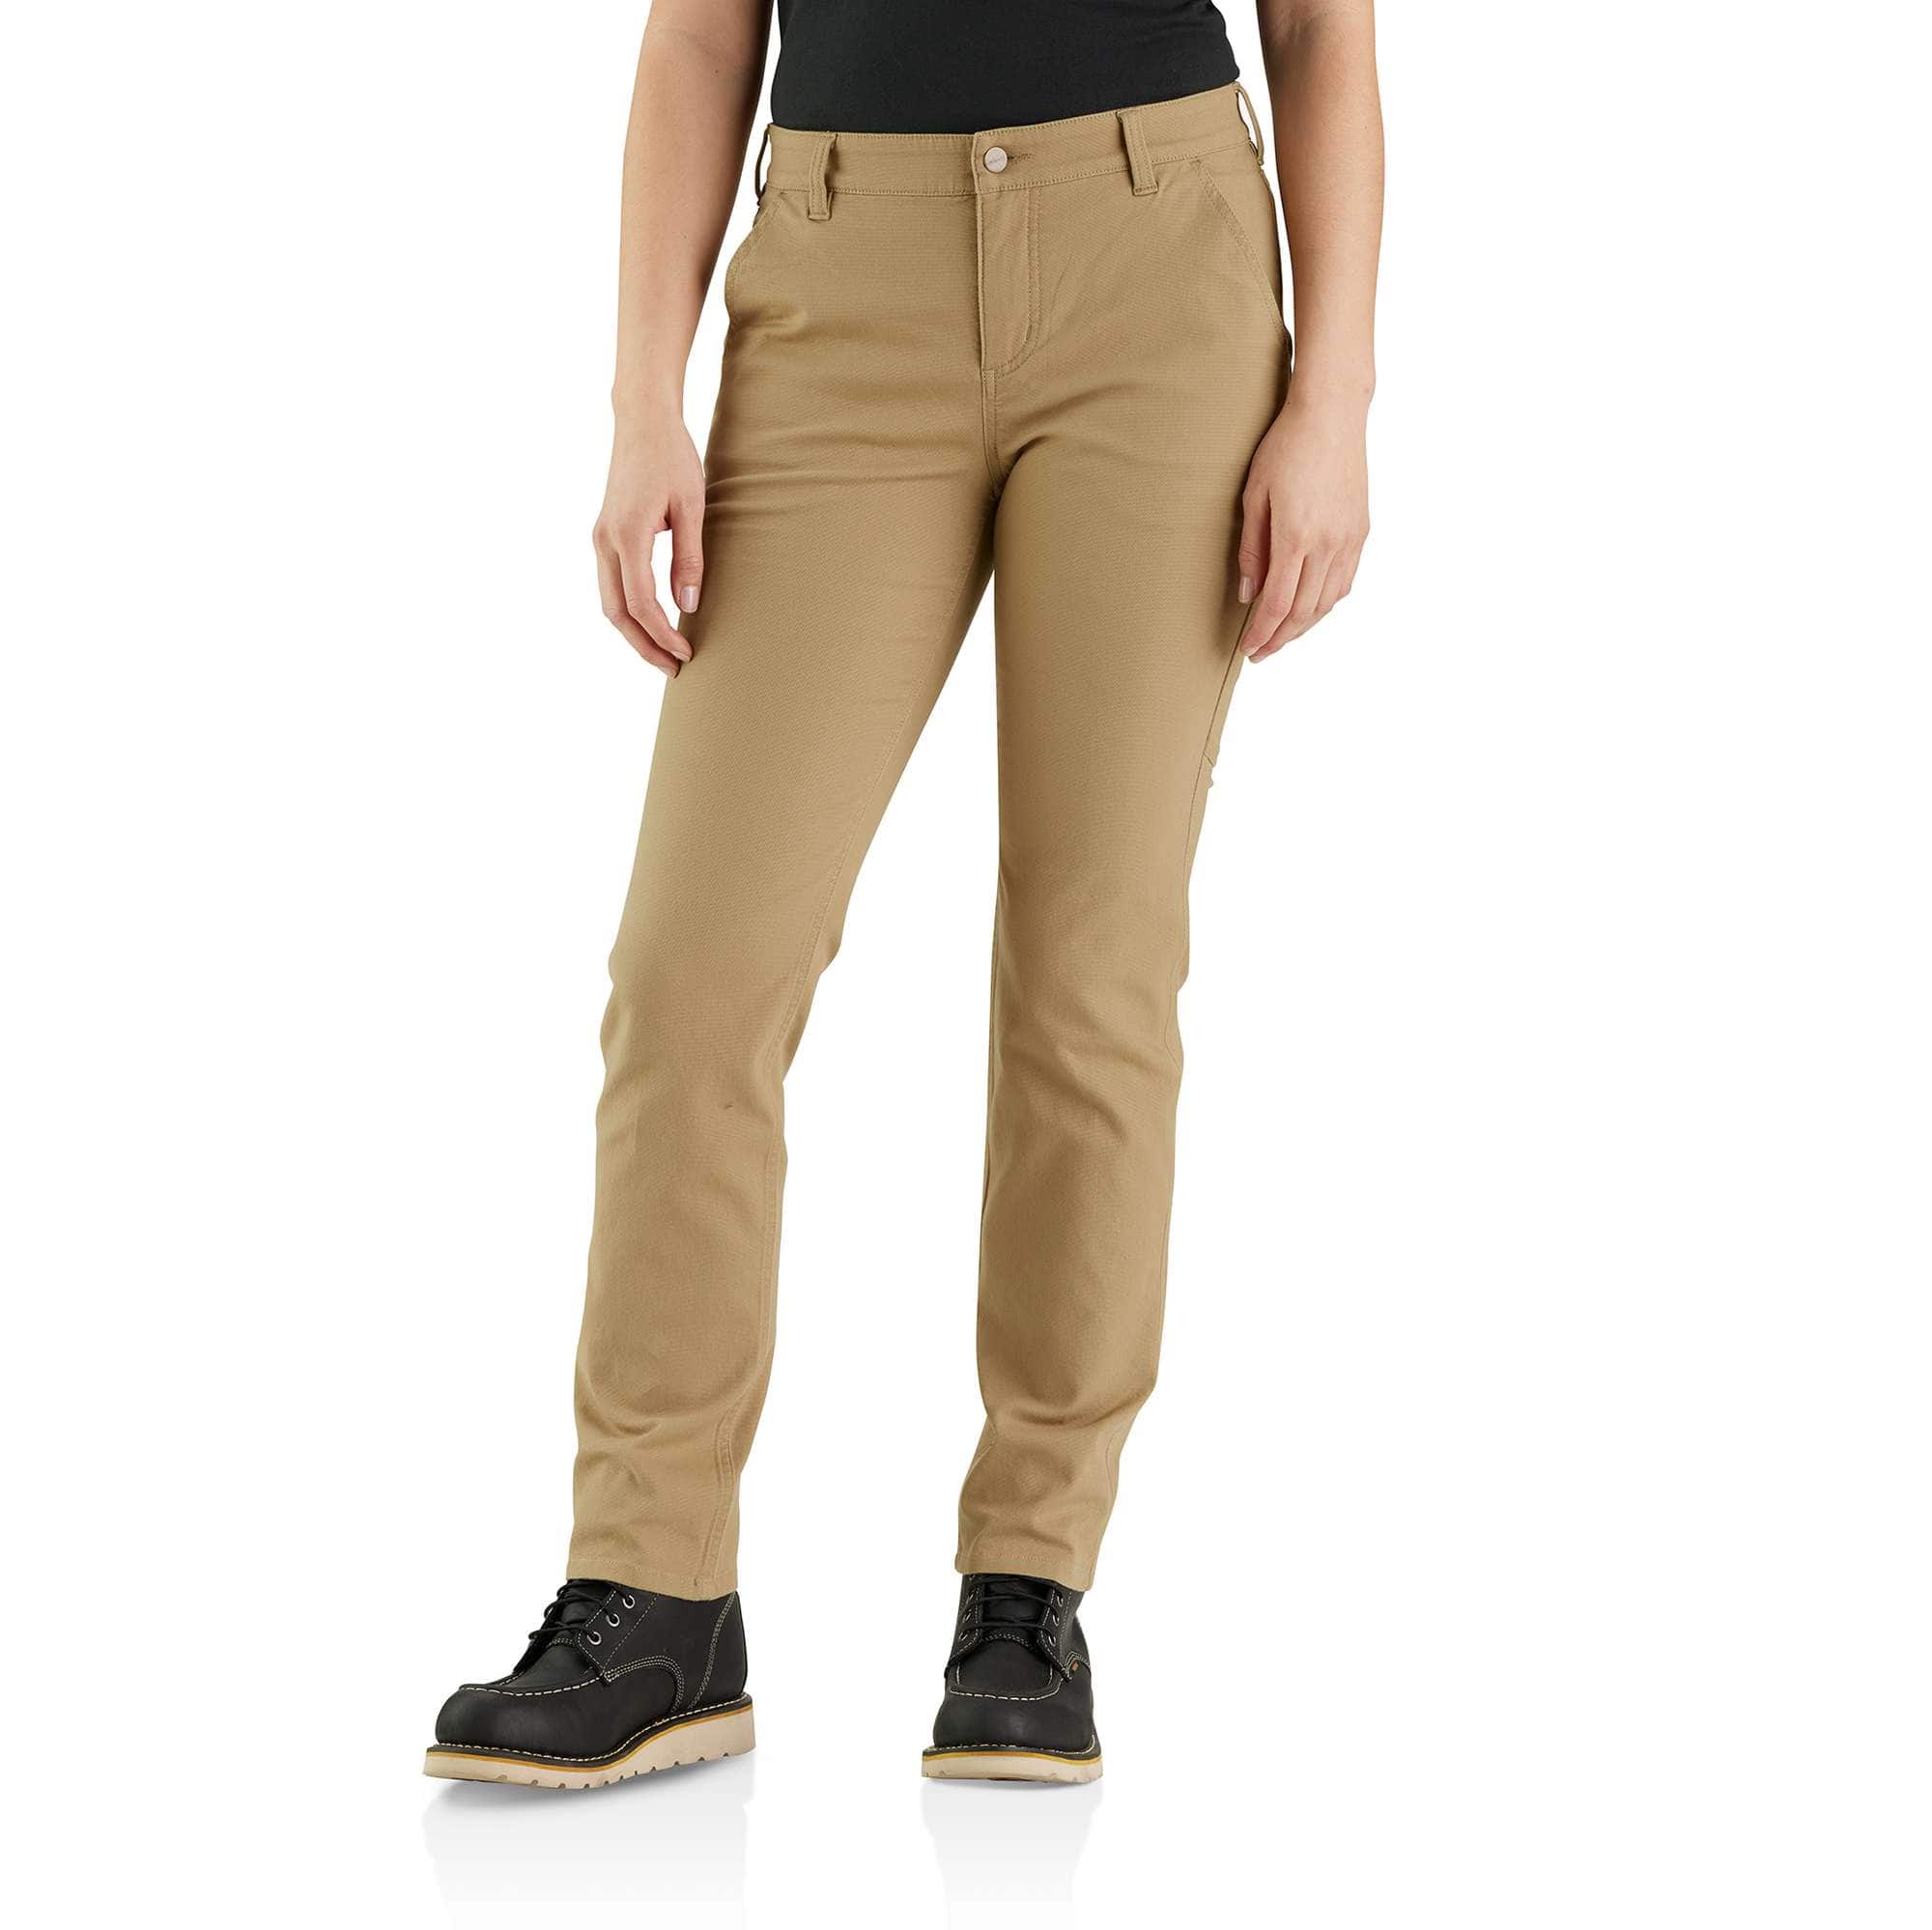 CARHARTT 105283 WOMEN'S FR FITTED MIDWEIGHT UTILITY LEGGING